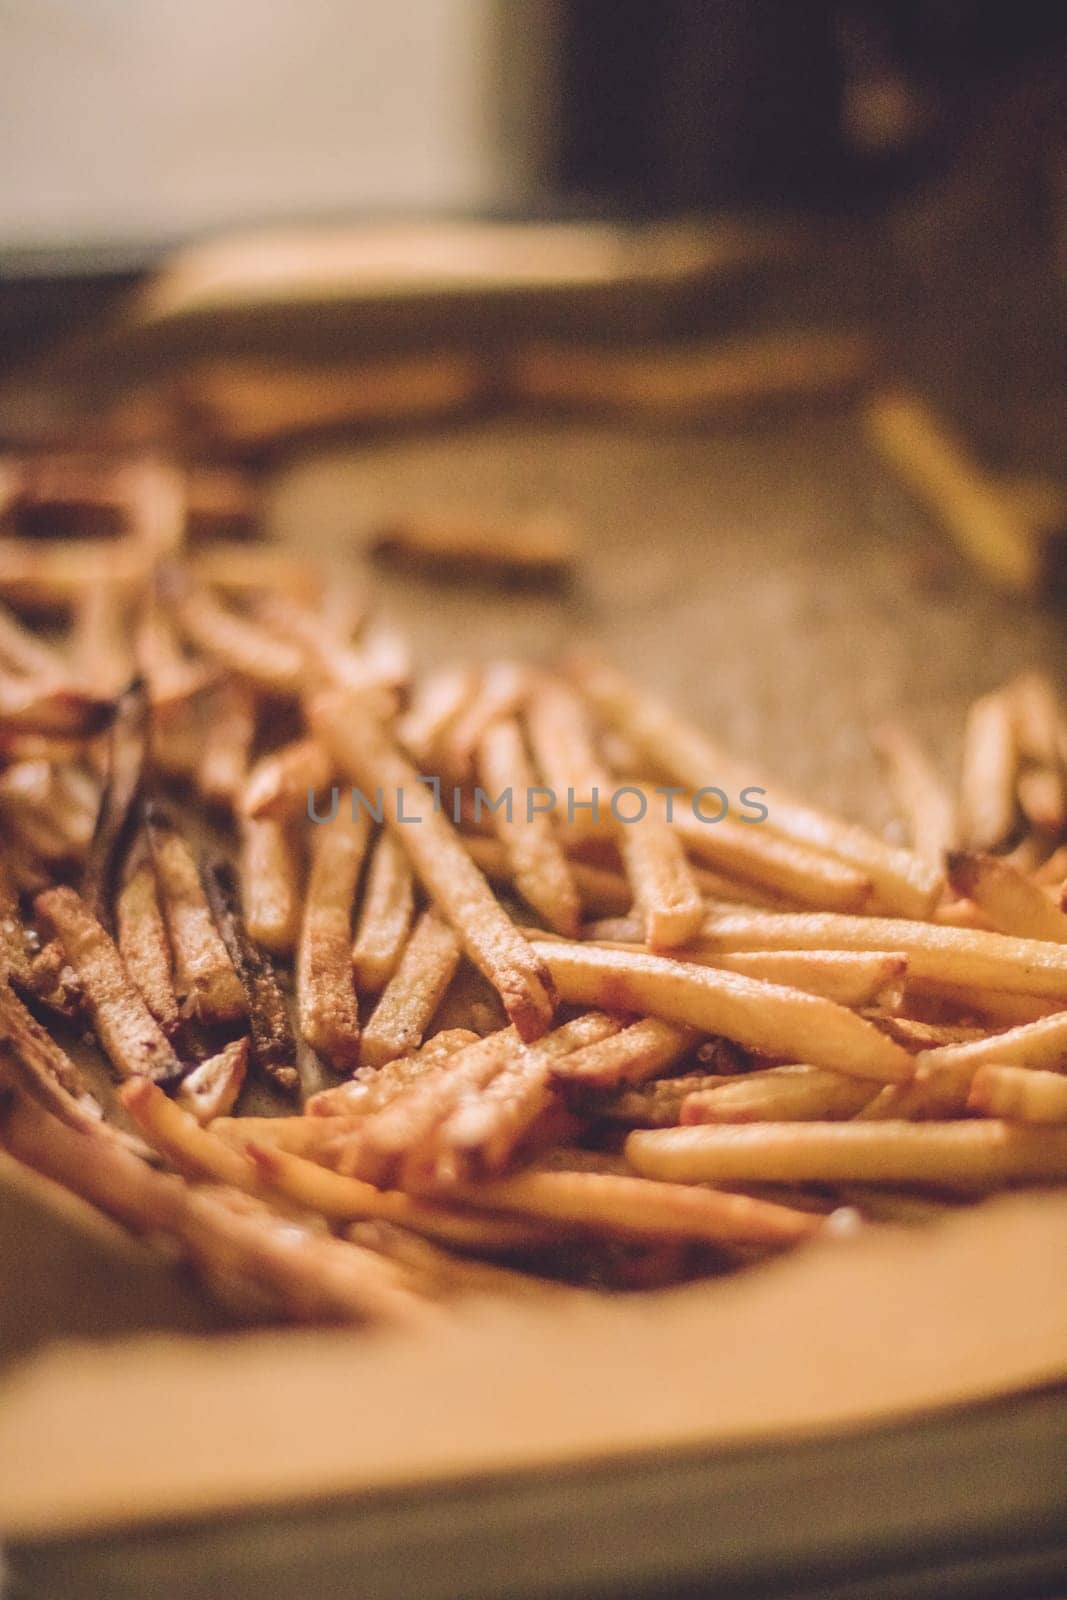 just cooked french fries in the oven - rustic food and homemade cooking styled concept by Anneleven